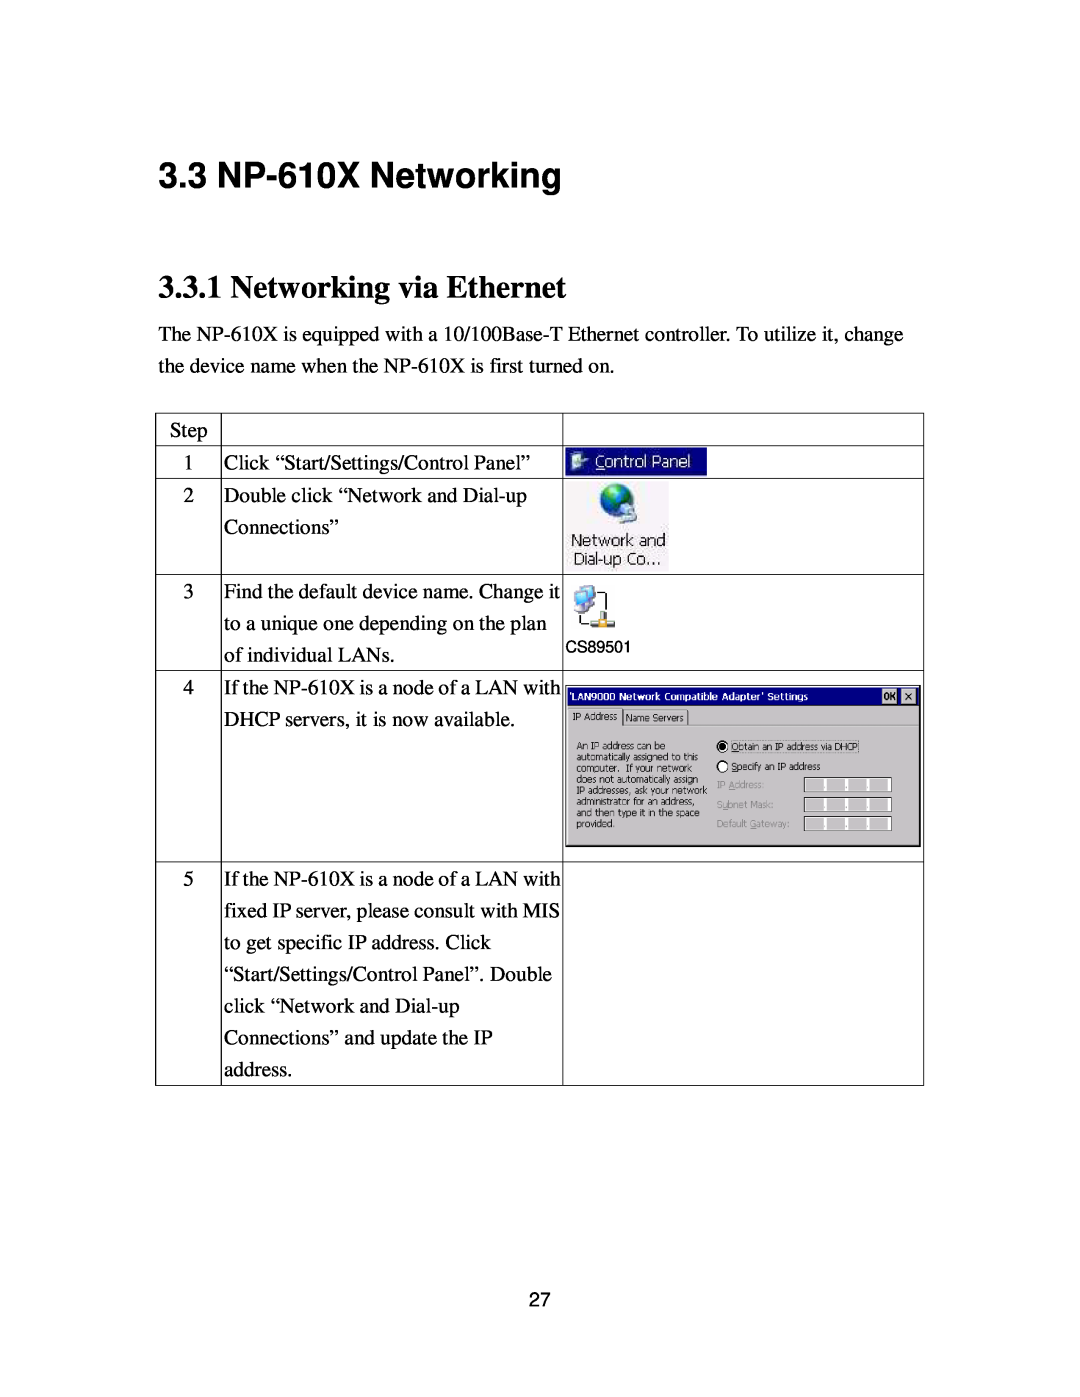 Nextar user manual 3.3 NP-610X Networking, Networking via Ethernet 